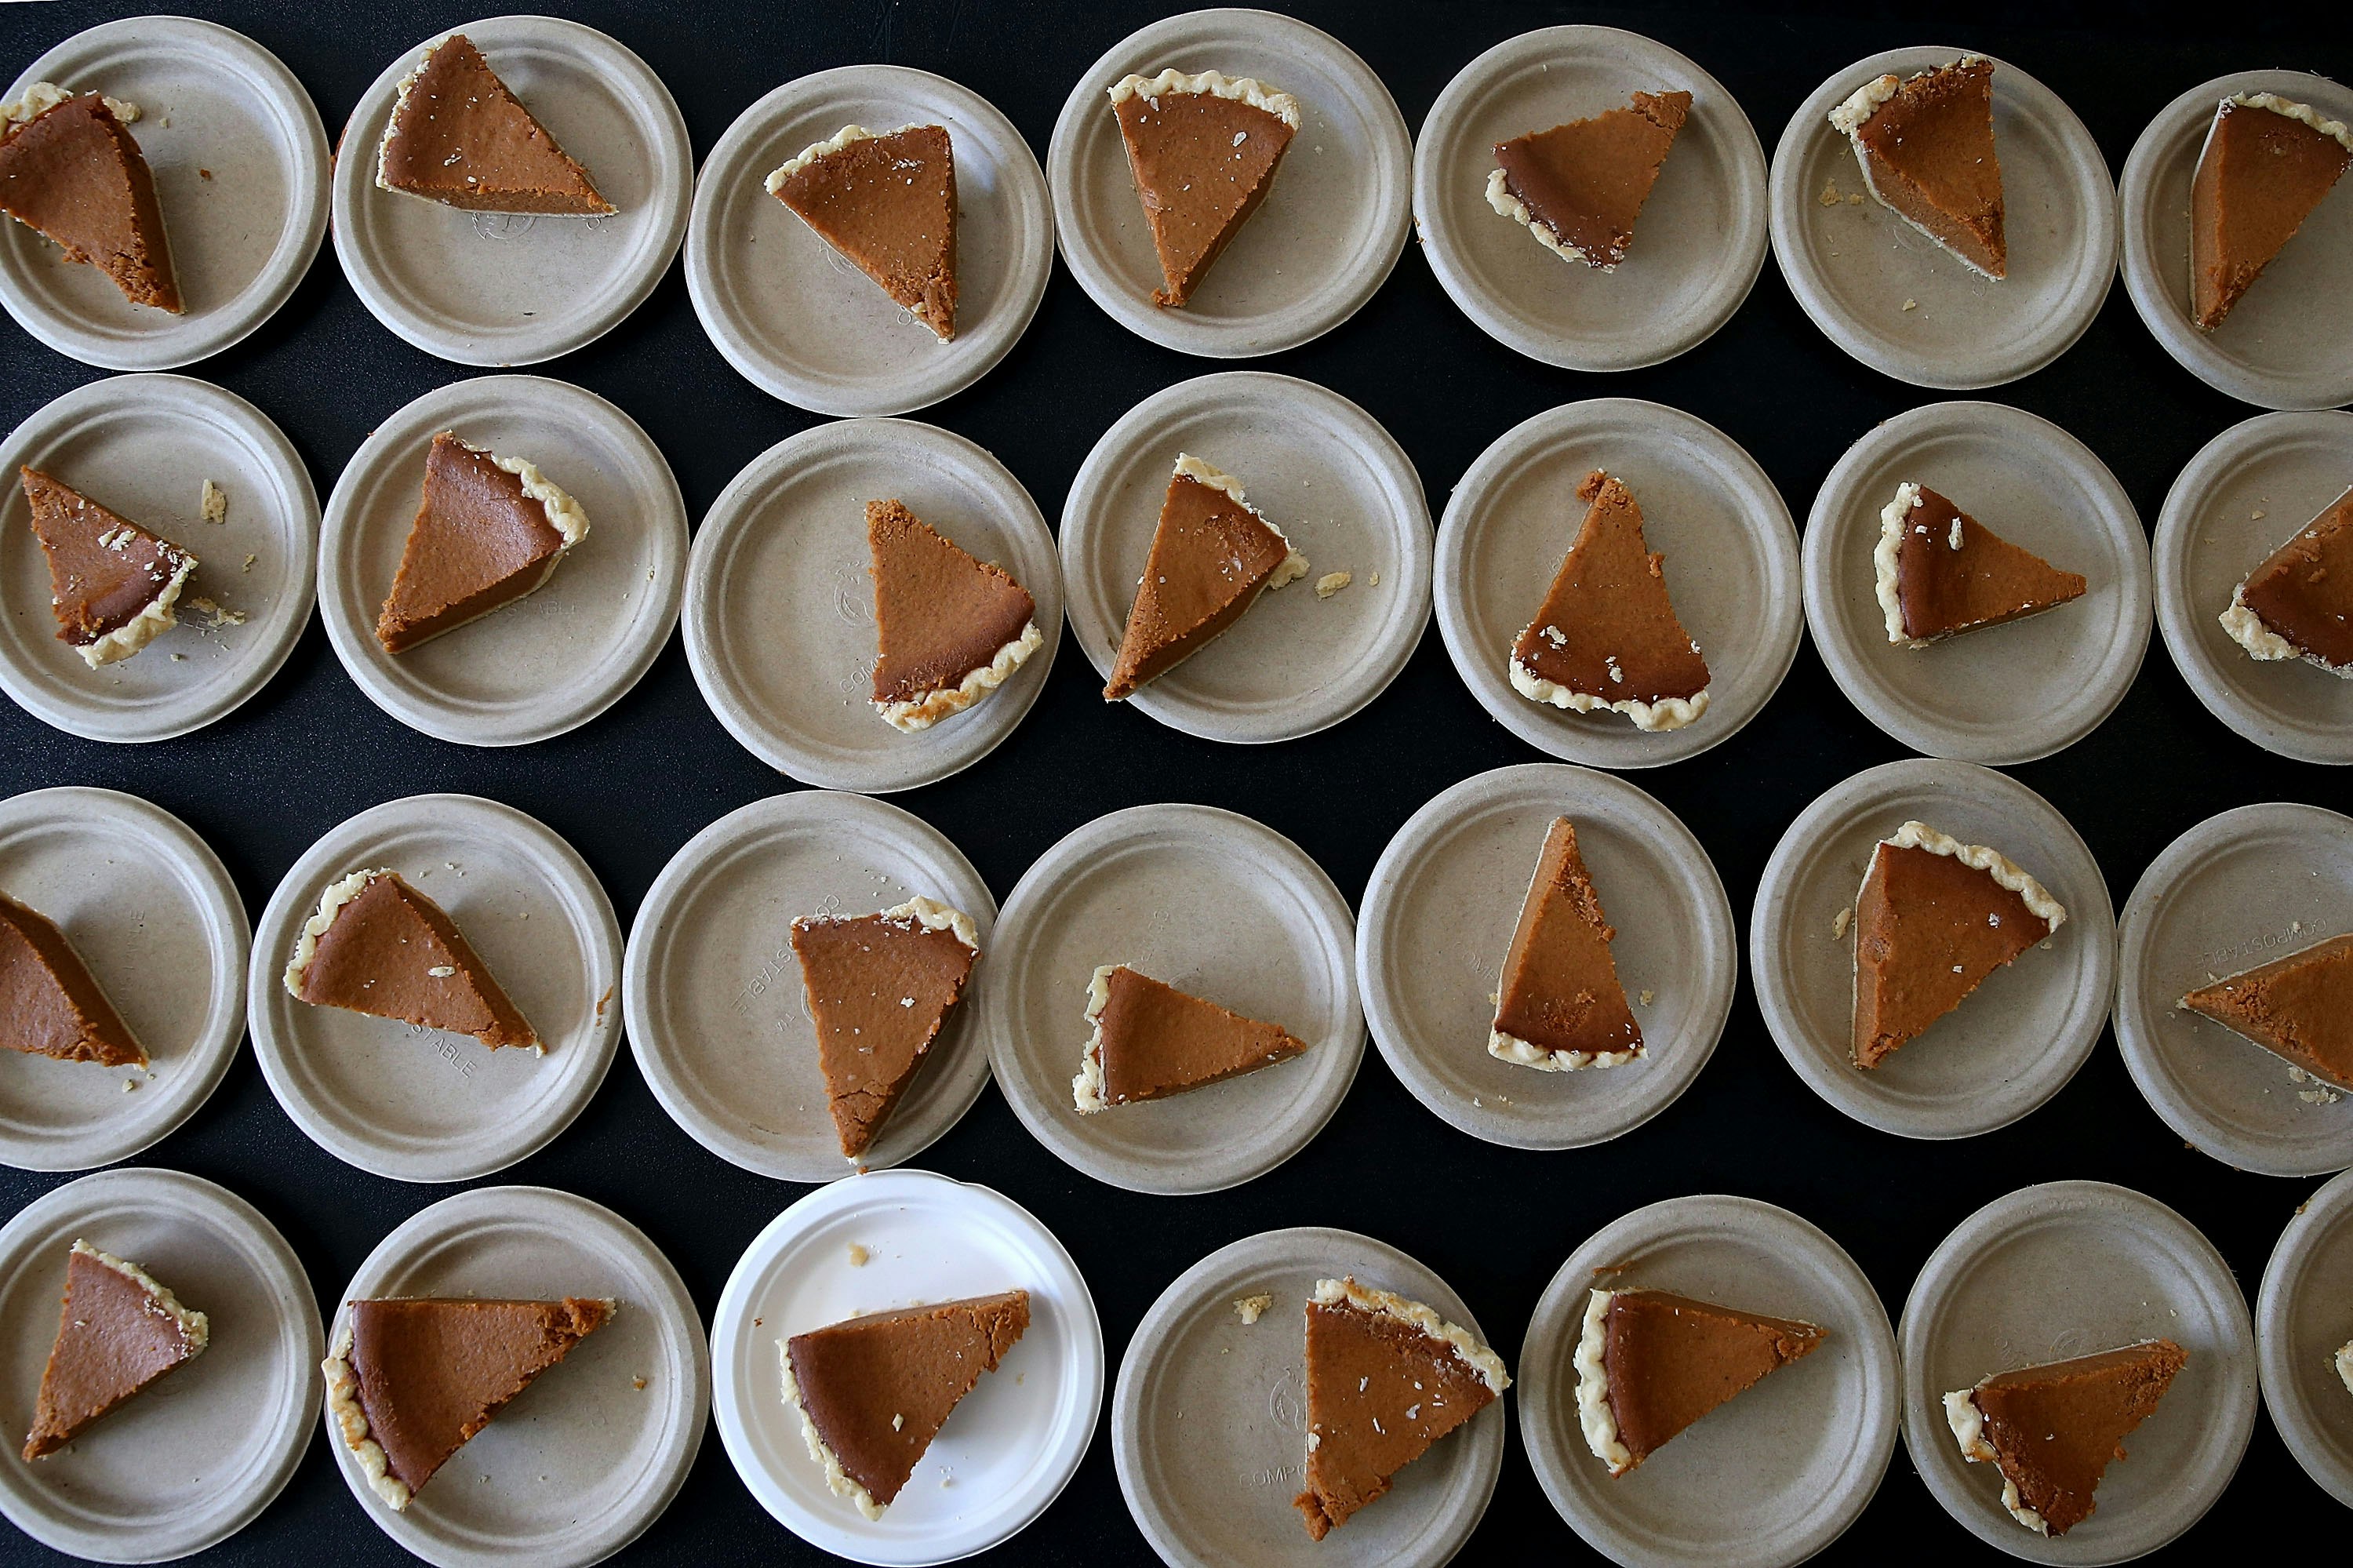 Rows of cardboard plates with slices of pumpkin pie sit on a black table 